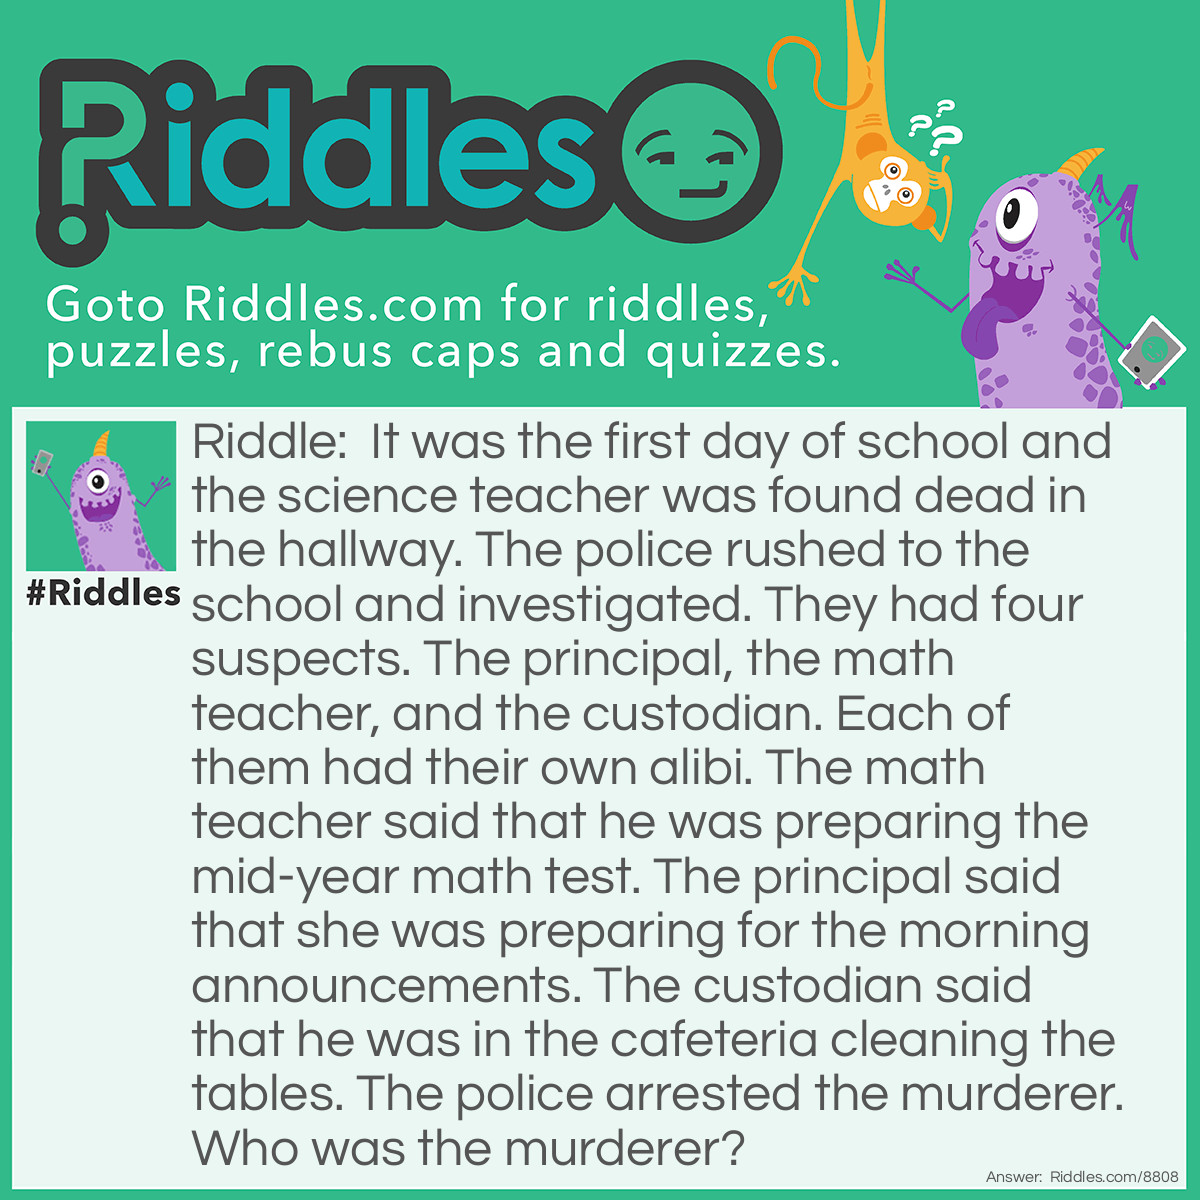 Riddle: It was the first day of school and the science teacher was found dead in the hallway. The police rushed to the school and investigated. They had four suspects. The principal, the math teacher, and the custodian. Each of them had their own alibi. The math teacher said that he was preparing the mid-year math test. The principal said that she was preparing for the morning announcements. The custodian said that he was in the cafeteria cleaning the tables. The police arrested the murderer. Who was the murderer? Answer: The math teacher. He said that he was preparing the mid-year math test. And it was only the first day of school.